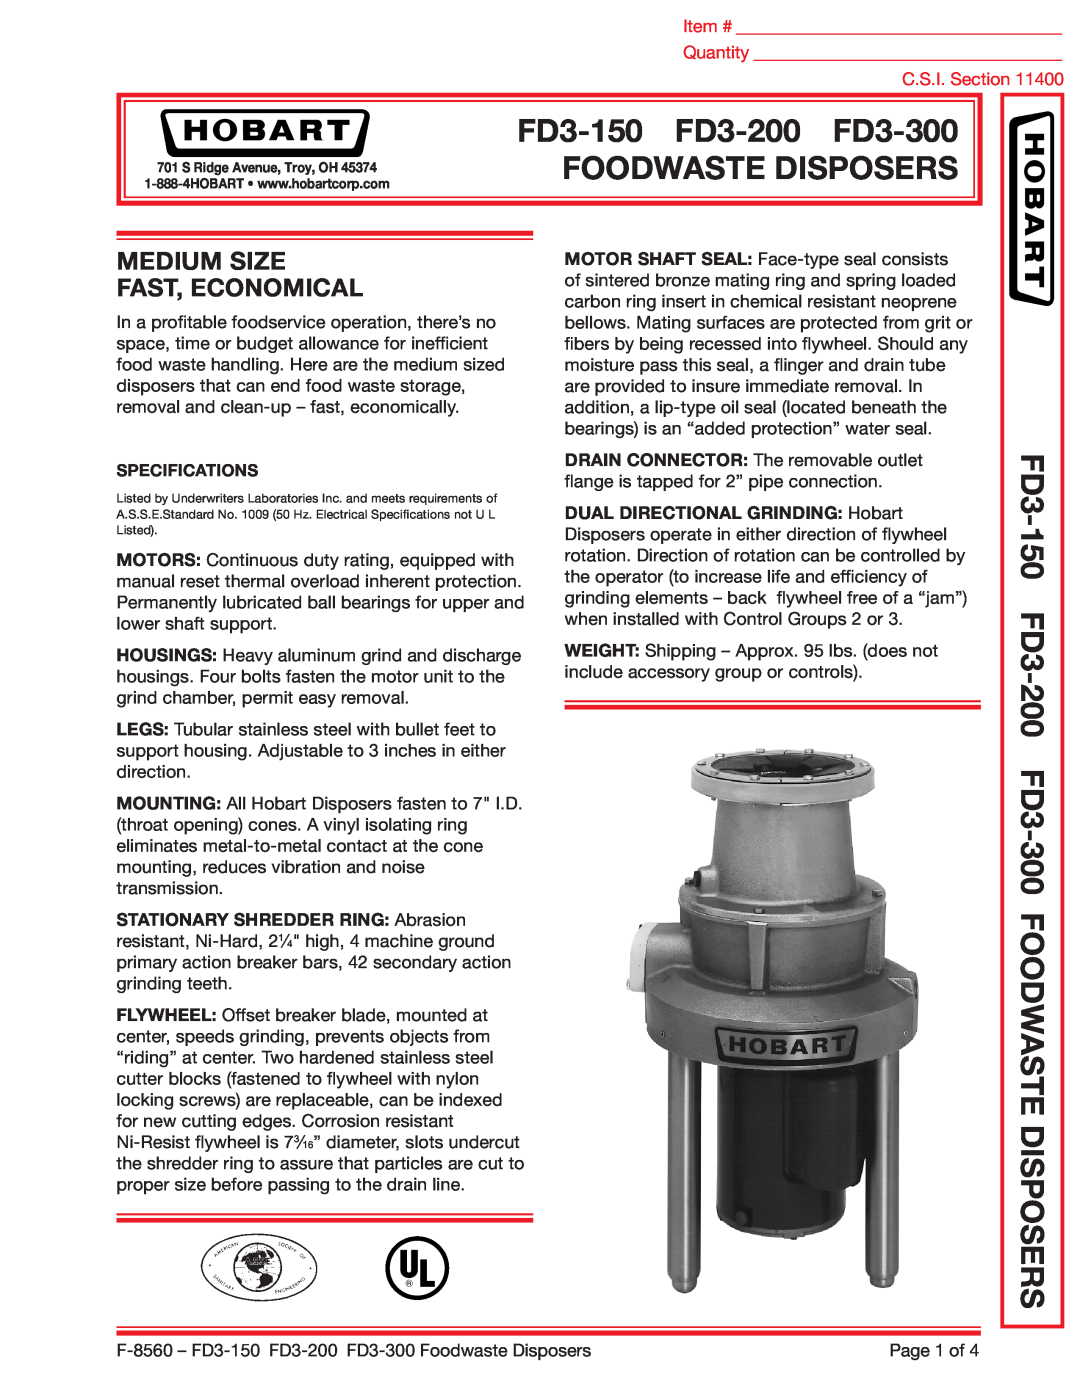 Hobart specifications Foodwaste Disposers, FD3-150 FD3-200 FD3-300FOODWASTE DISPOSERS, Medium Size Fast, Economical 